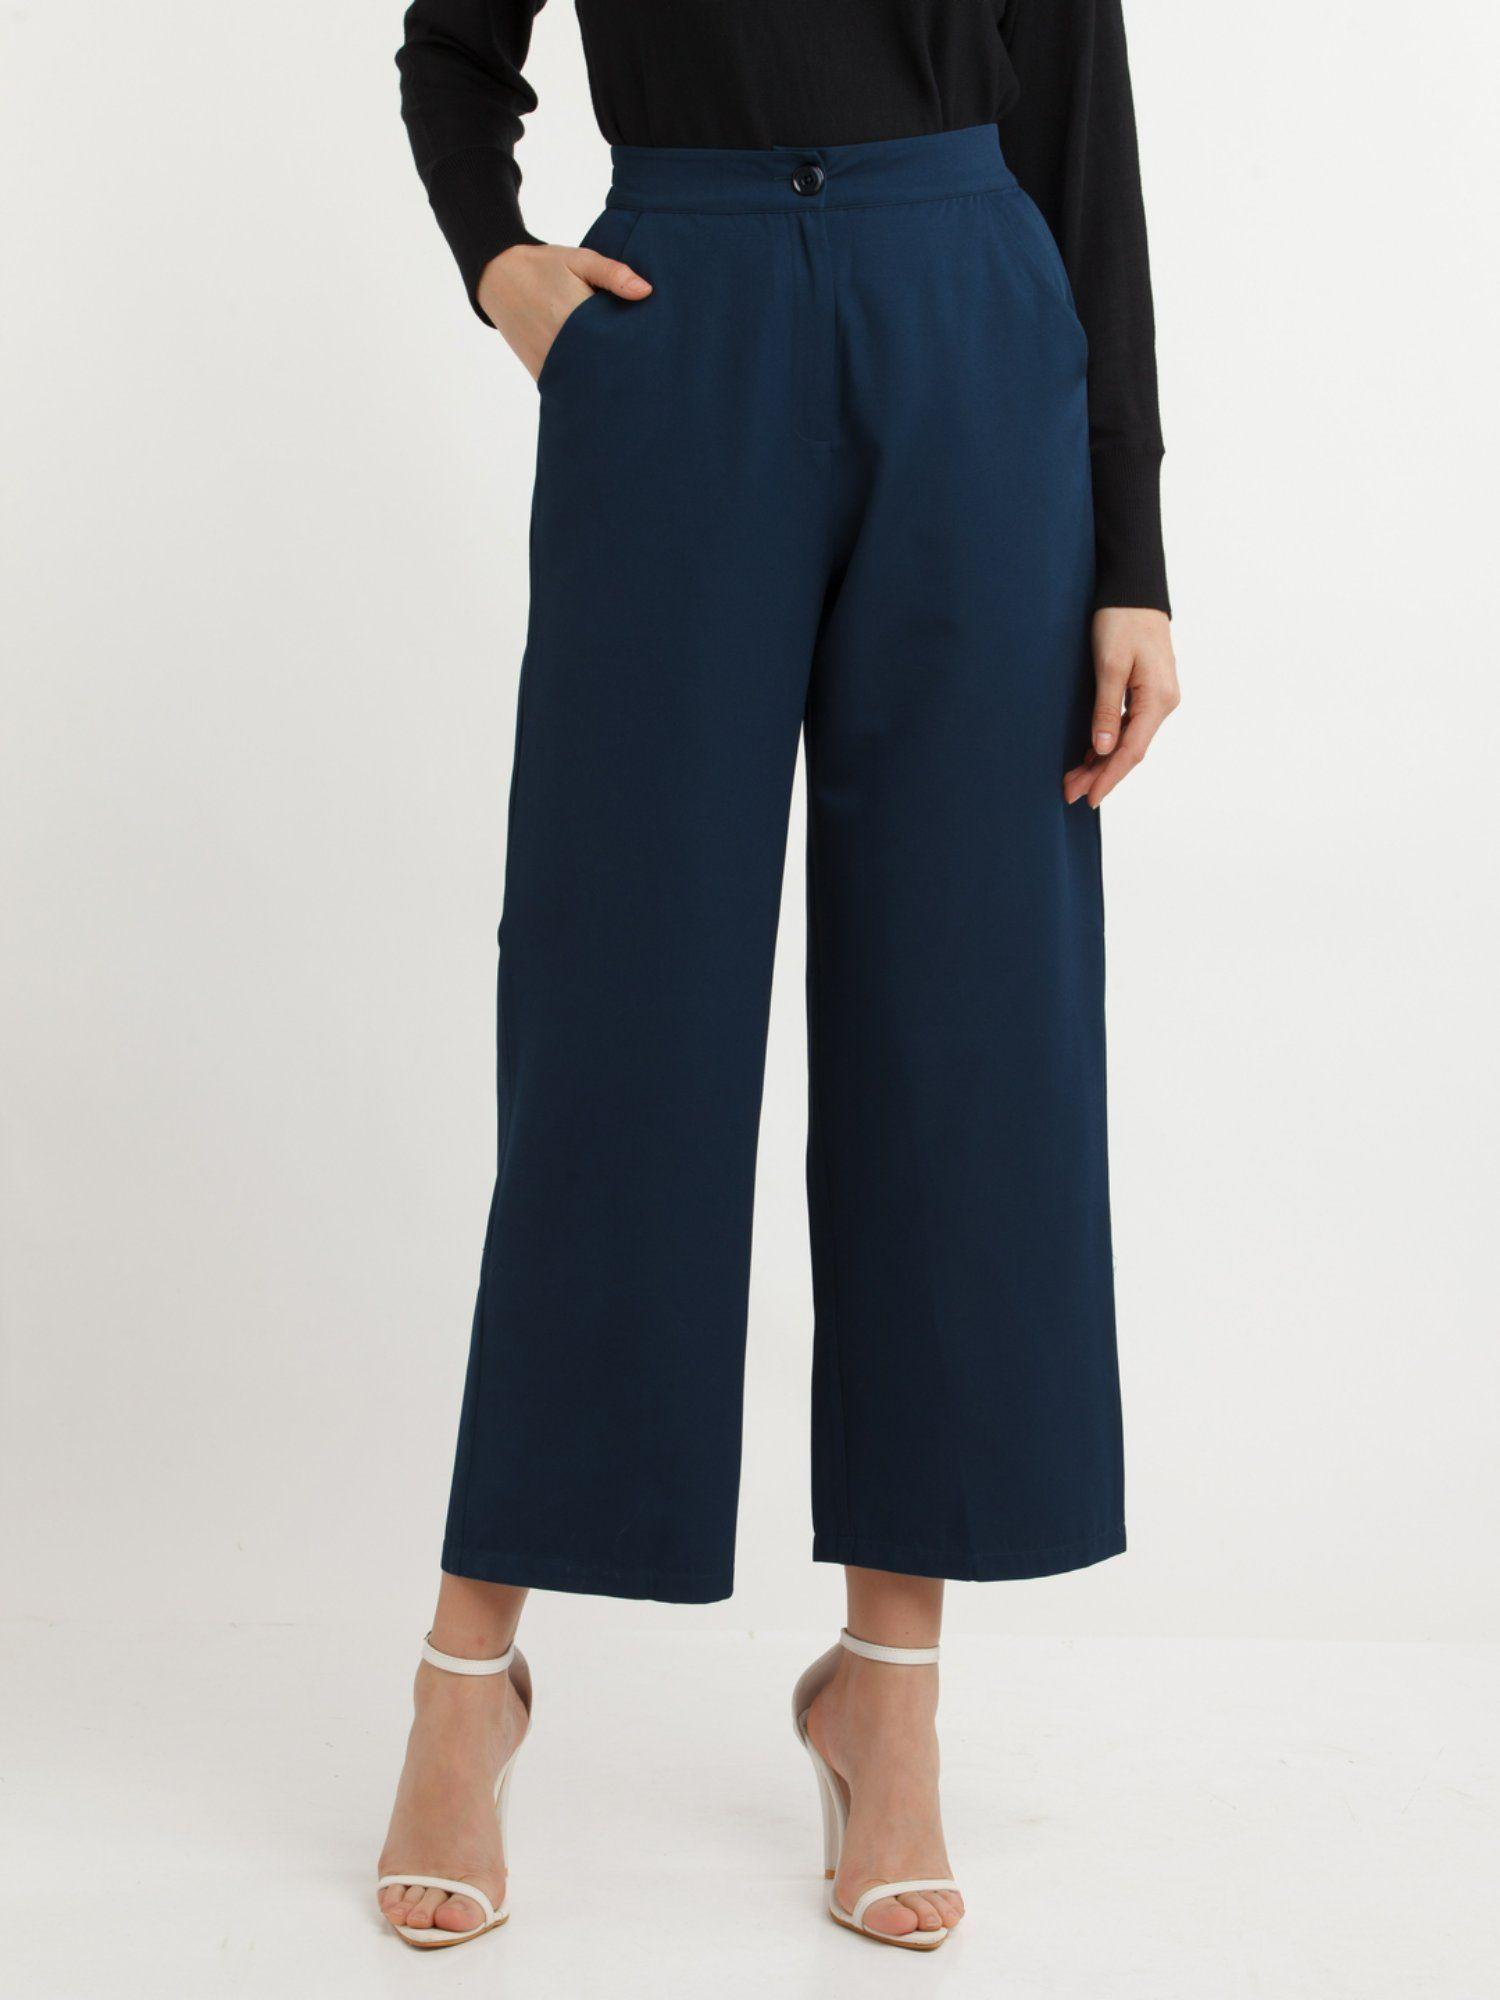 Womens Navy Blue Solid Pants